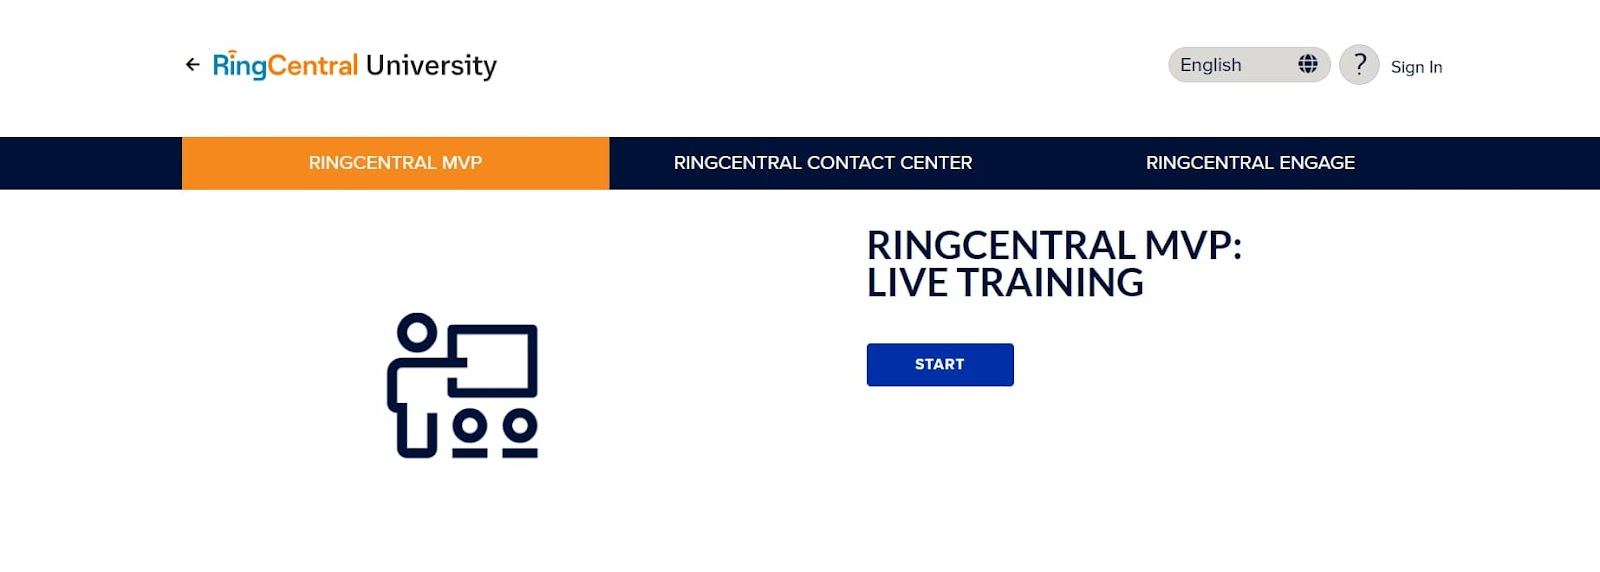 Screenshot of the RingCentral University live training web landing page